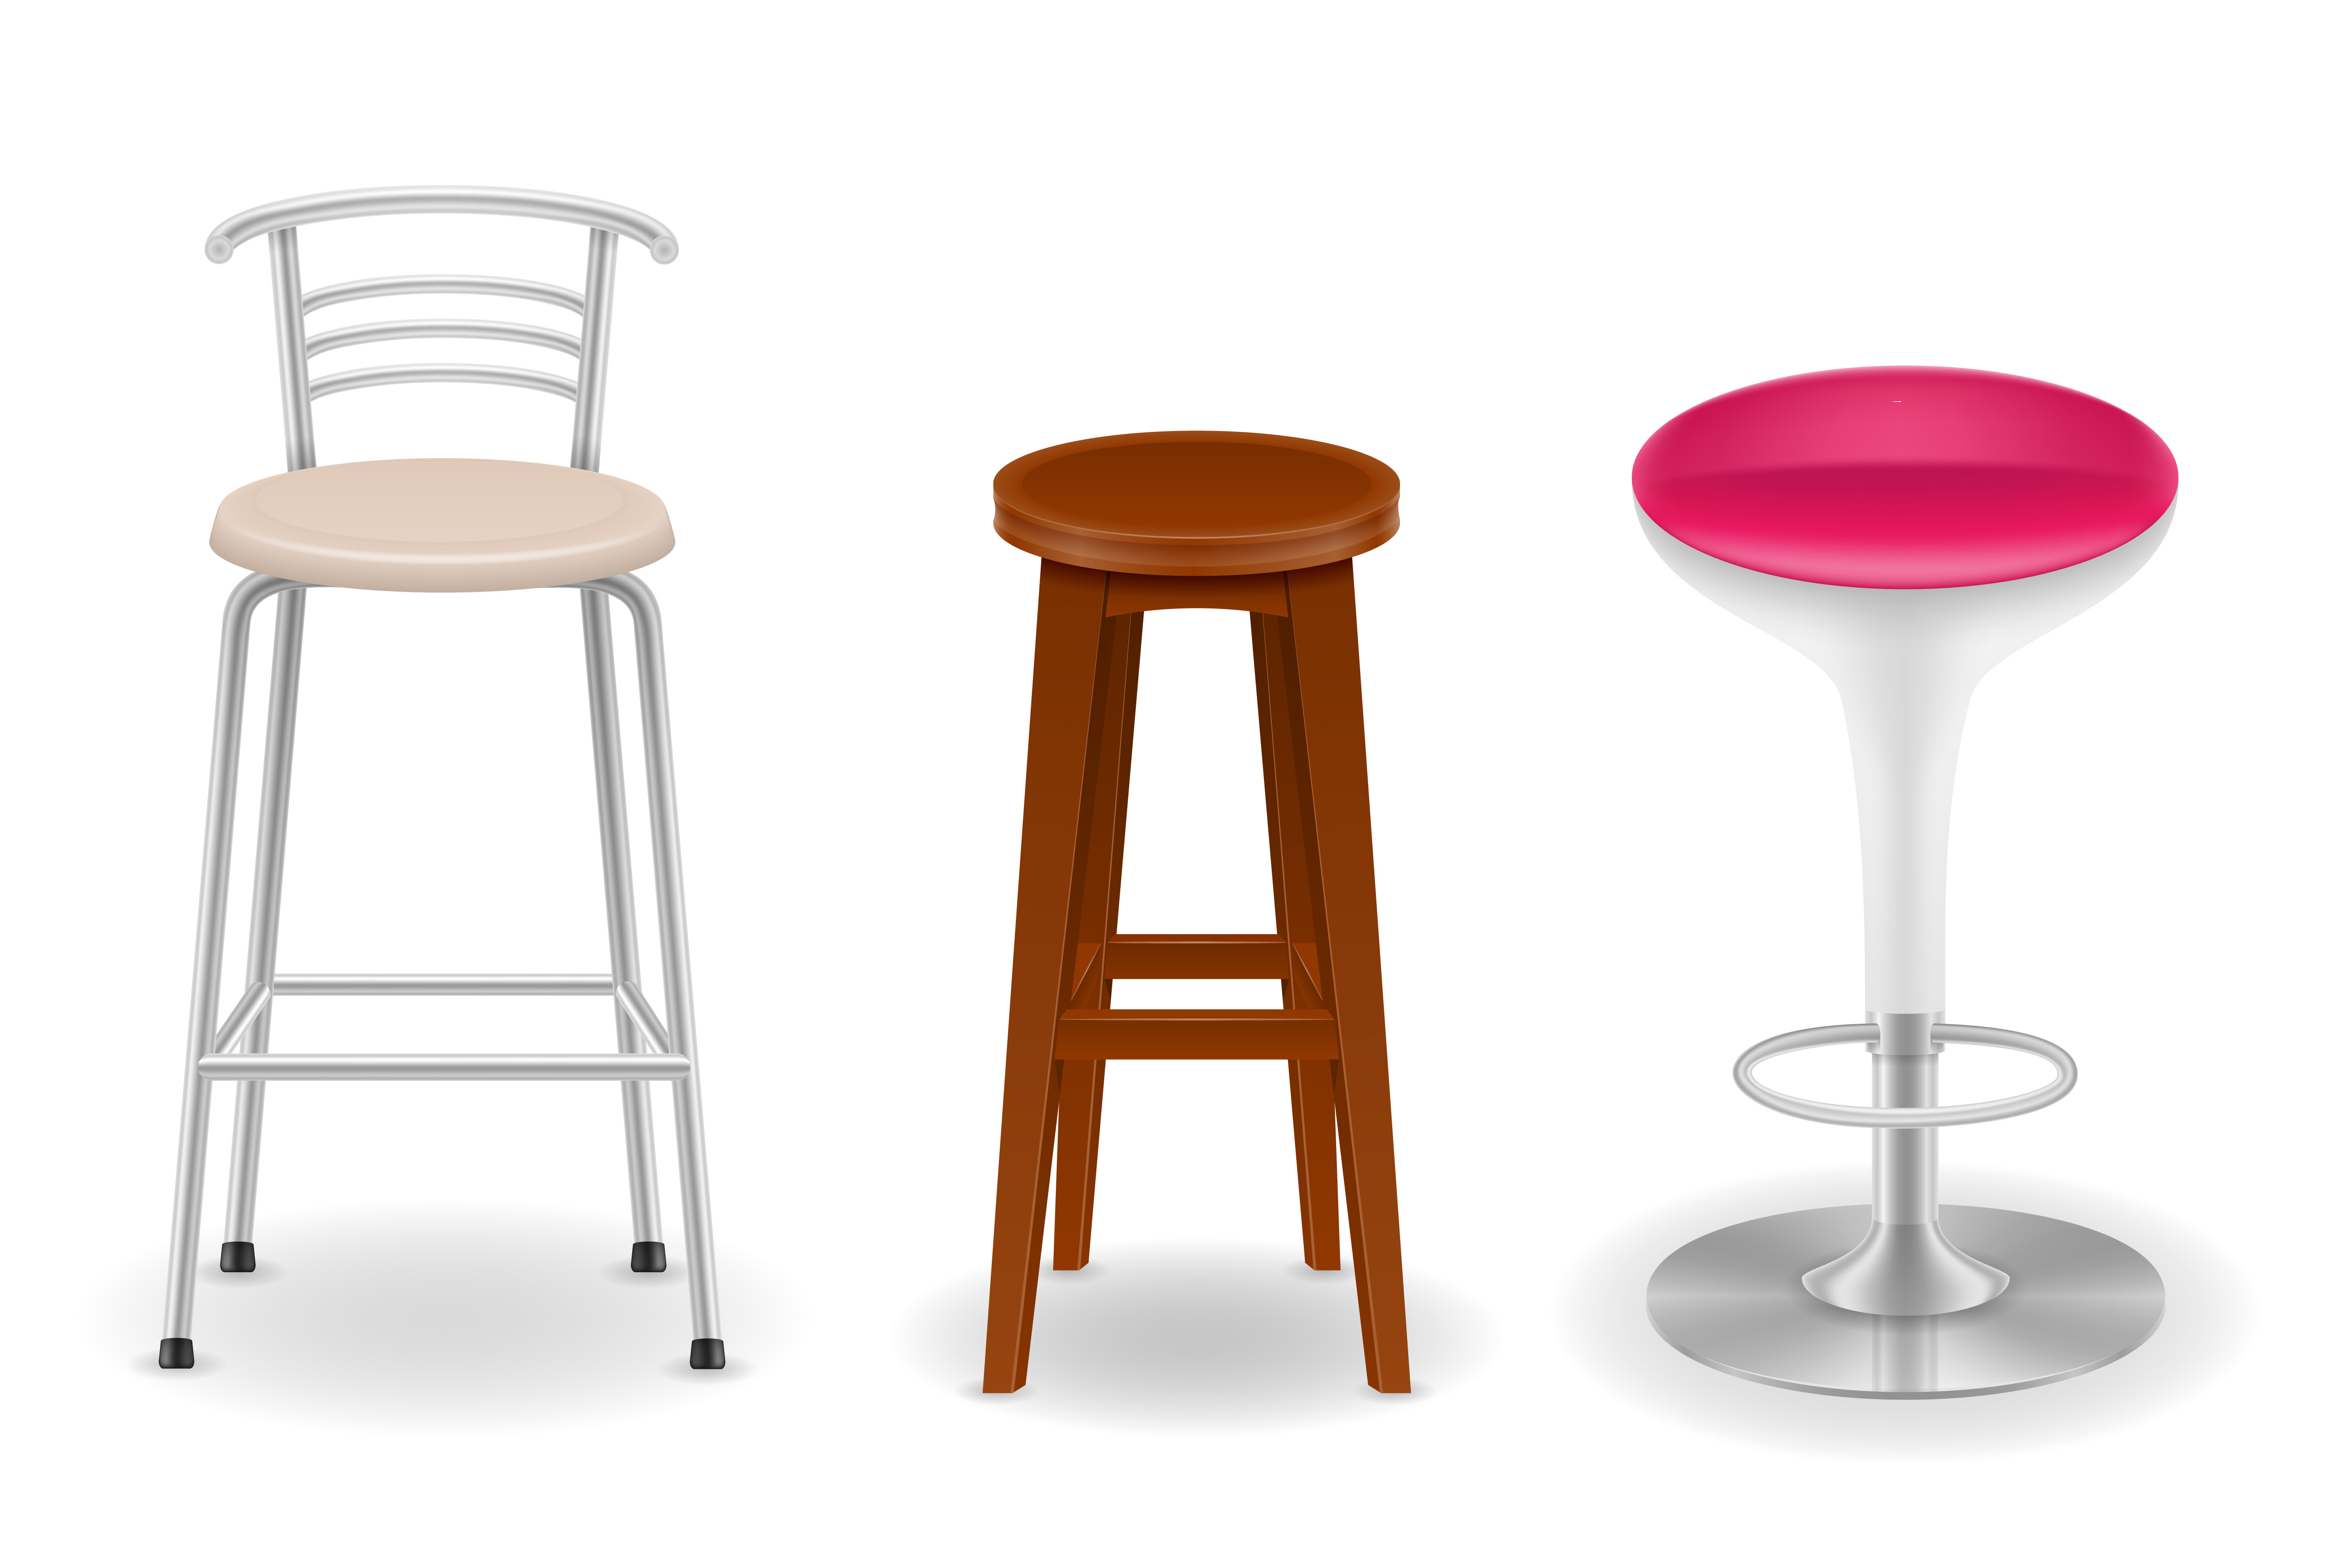 bar chair stool set icons vector illustration - Download ...